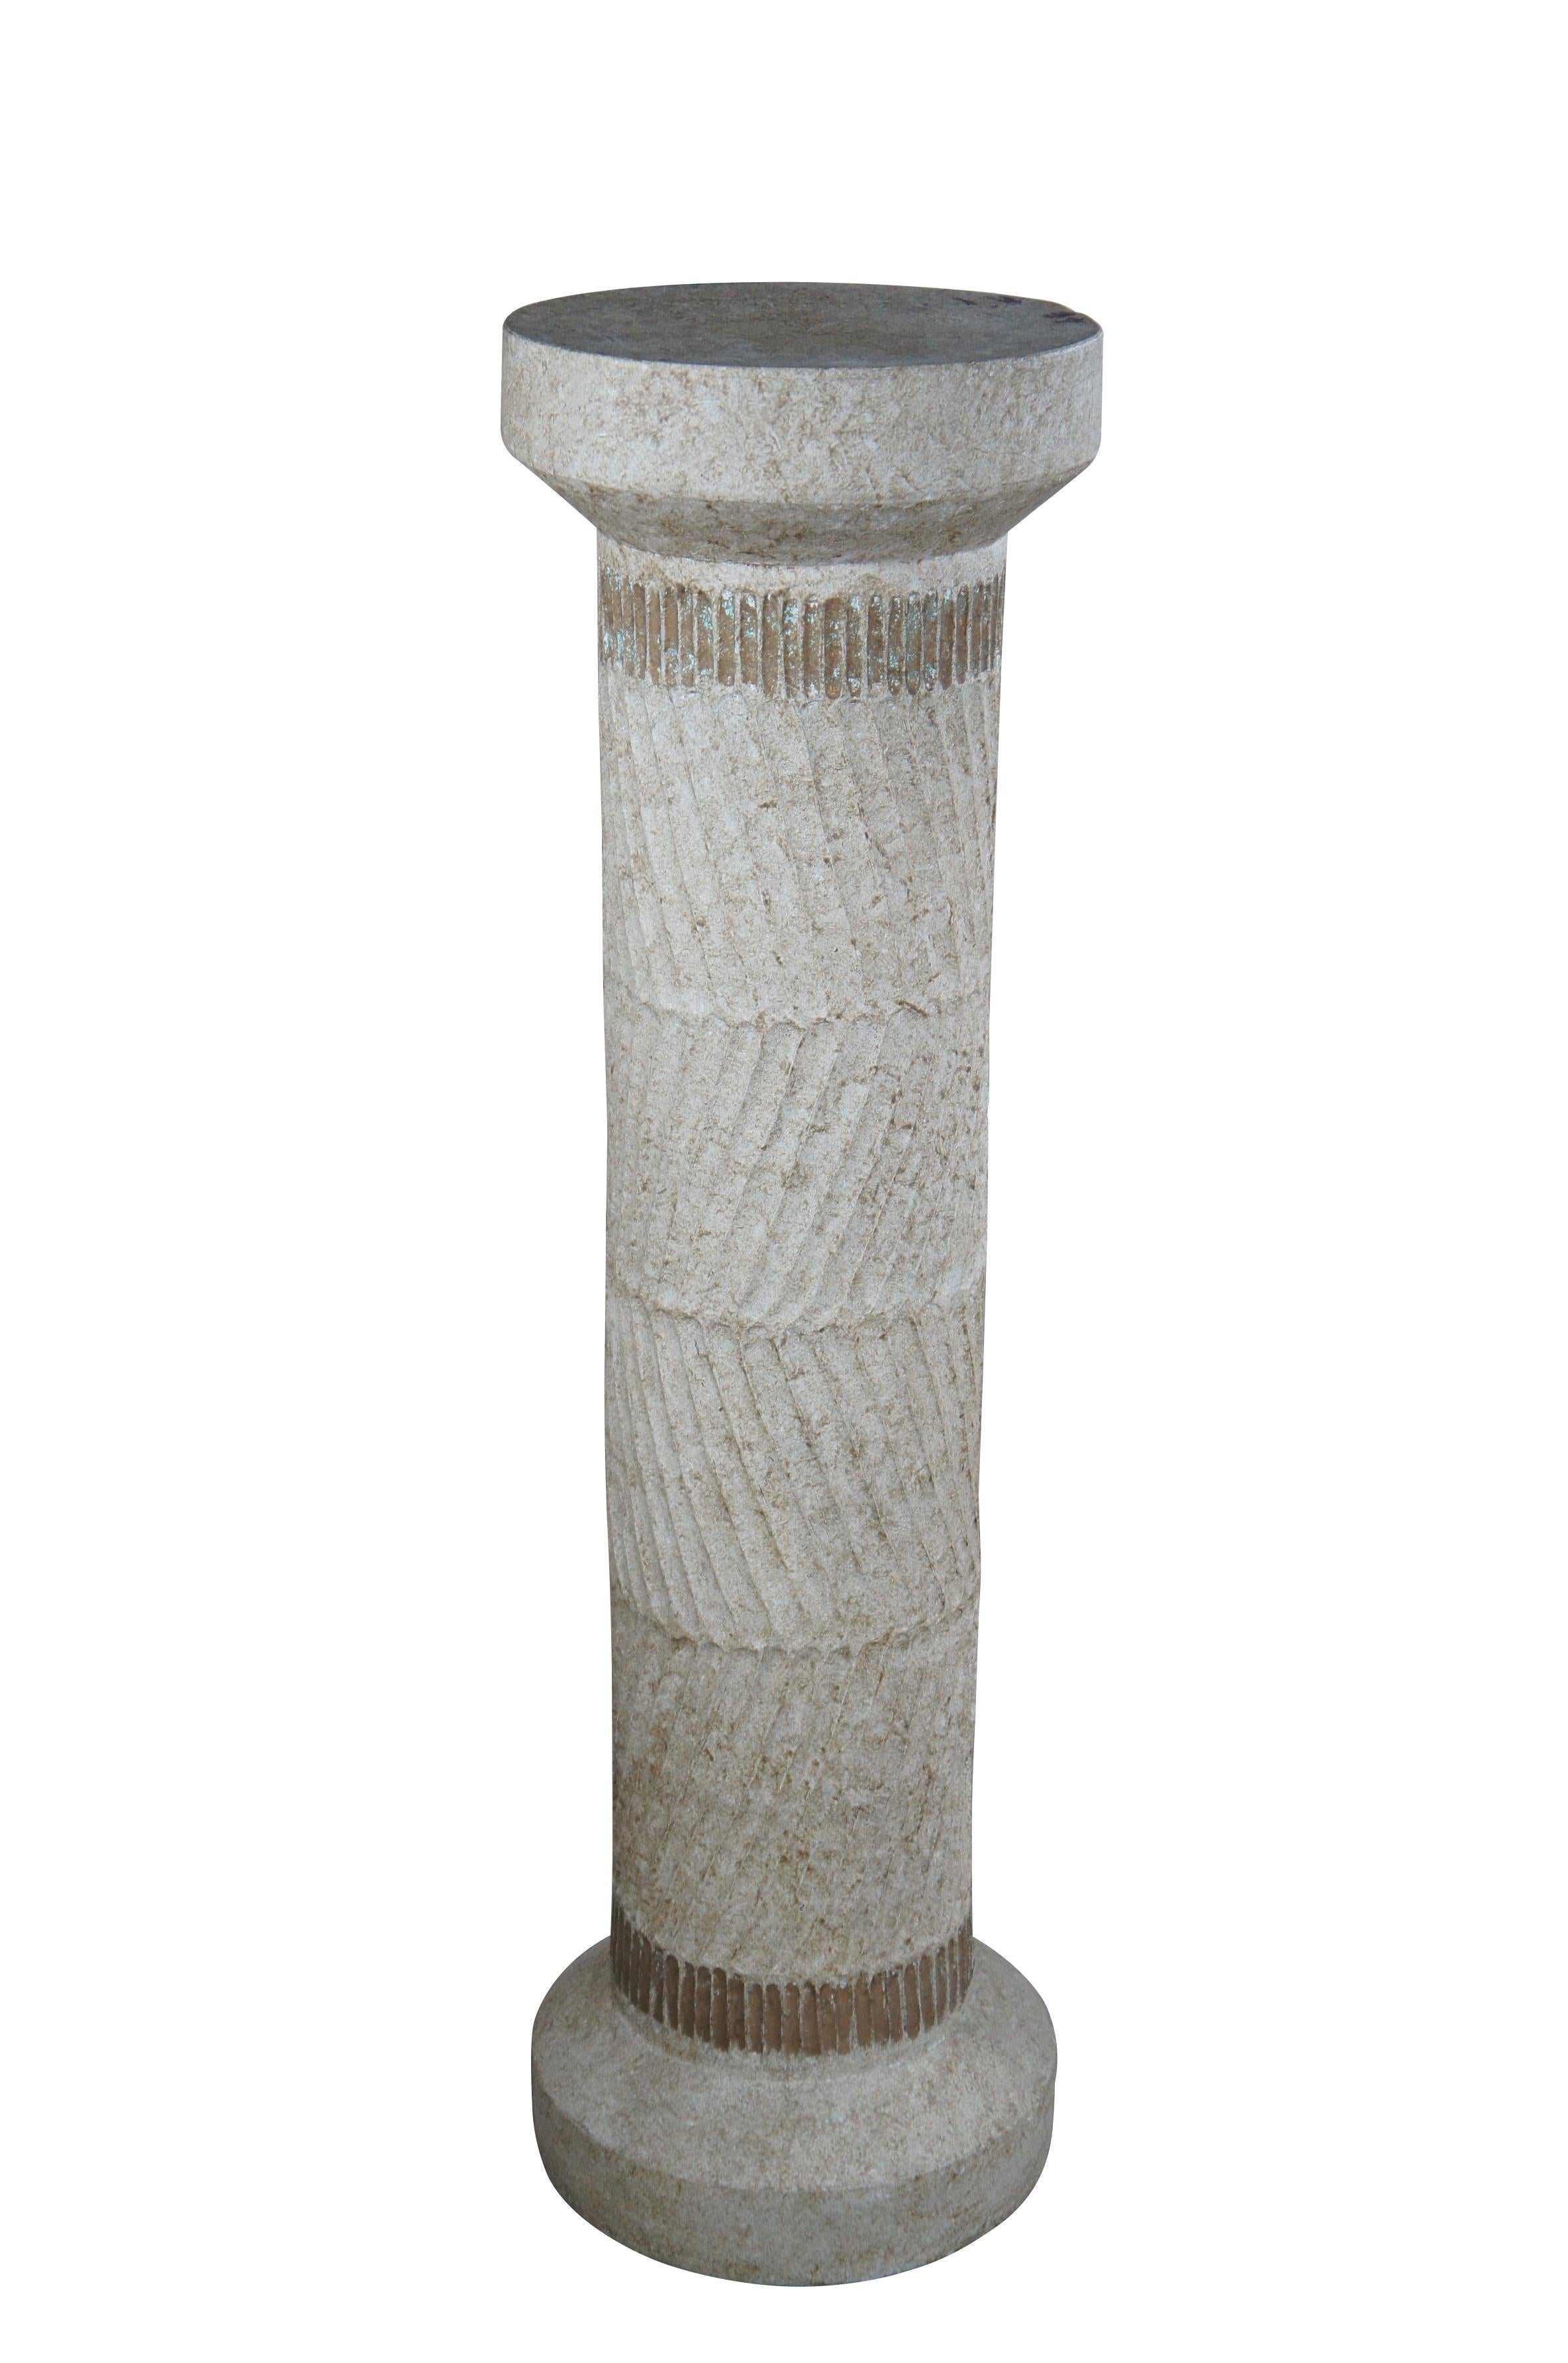 Neoclassical inspired pedestal or sculpture / display stand. Made of chalkware (plaster) featuring round column form with distressed finish

Dimensions:
14